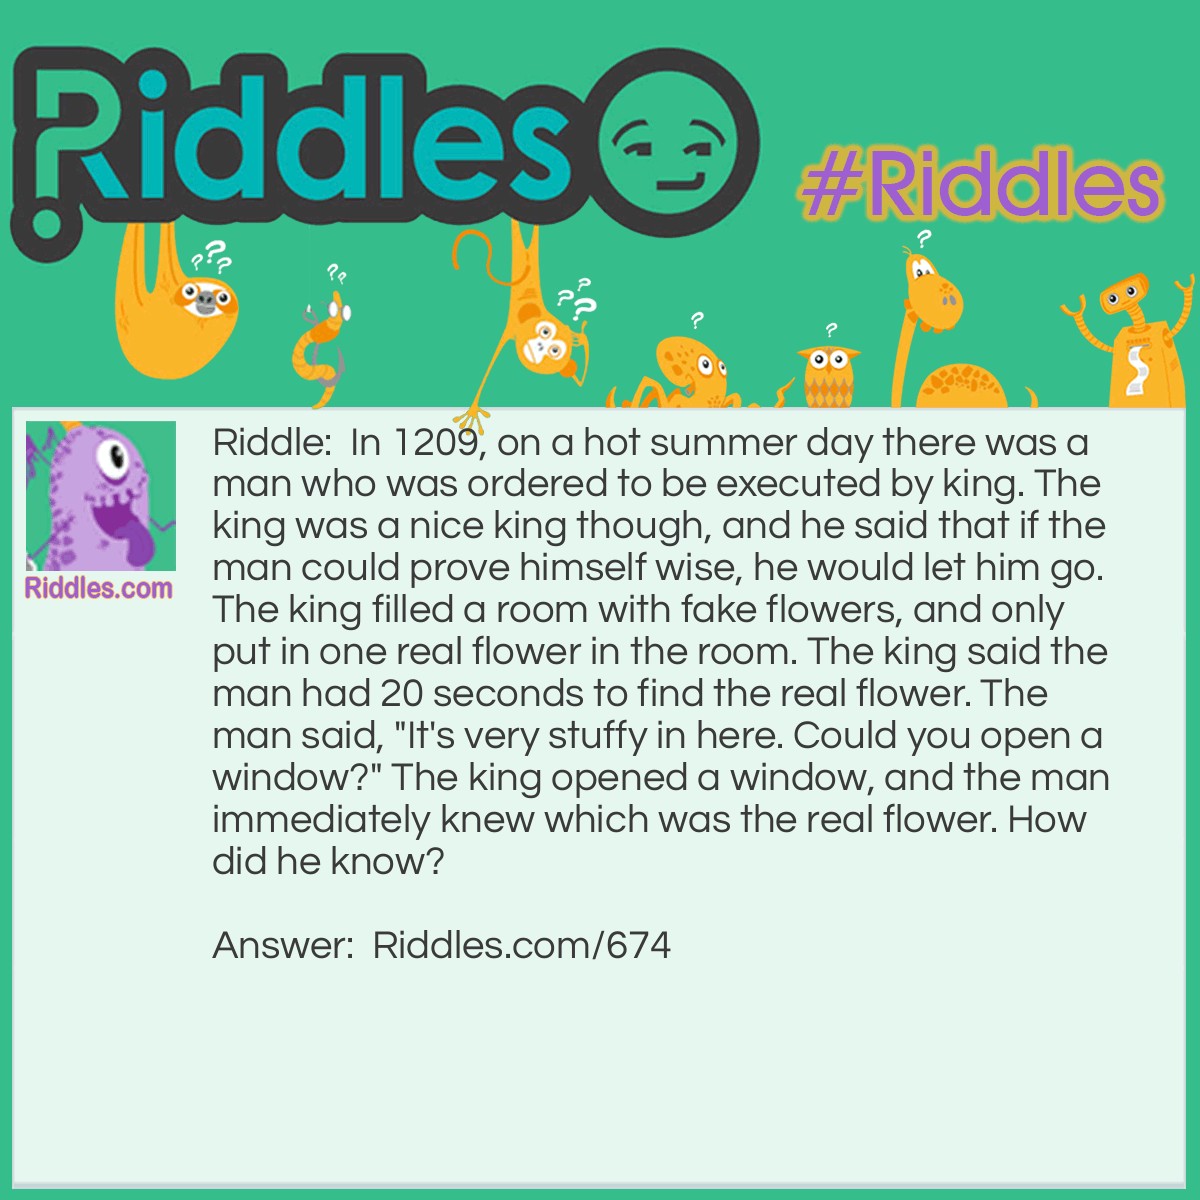 Riddle: In 1209, on a hot summer day, there was a man who was ordered to be executed by the king. The king was a nice king though, and he said that if the man could prove himself wise, he would let him go. The king filled a room with fake flowers and only put one real flower in the room. The king said the man had 20 seconds to find the real flower. The man said, "It's very stuffy in here. Could you open a window?" The king opened a window, and the man immediately knew which was the real flower. How did he know? Answer: When the King opened the window, a bee flew in and landed on the only real flower to gather pollen.